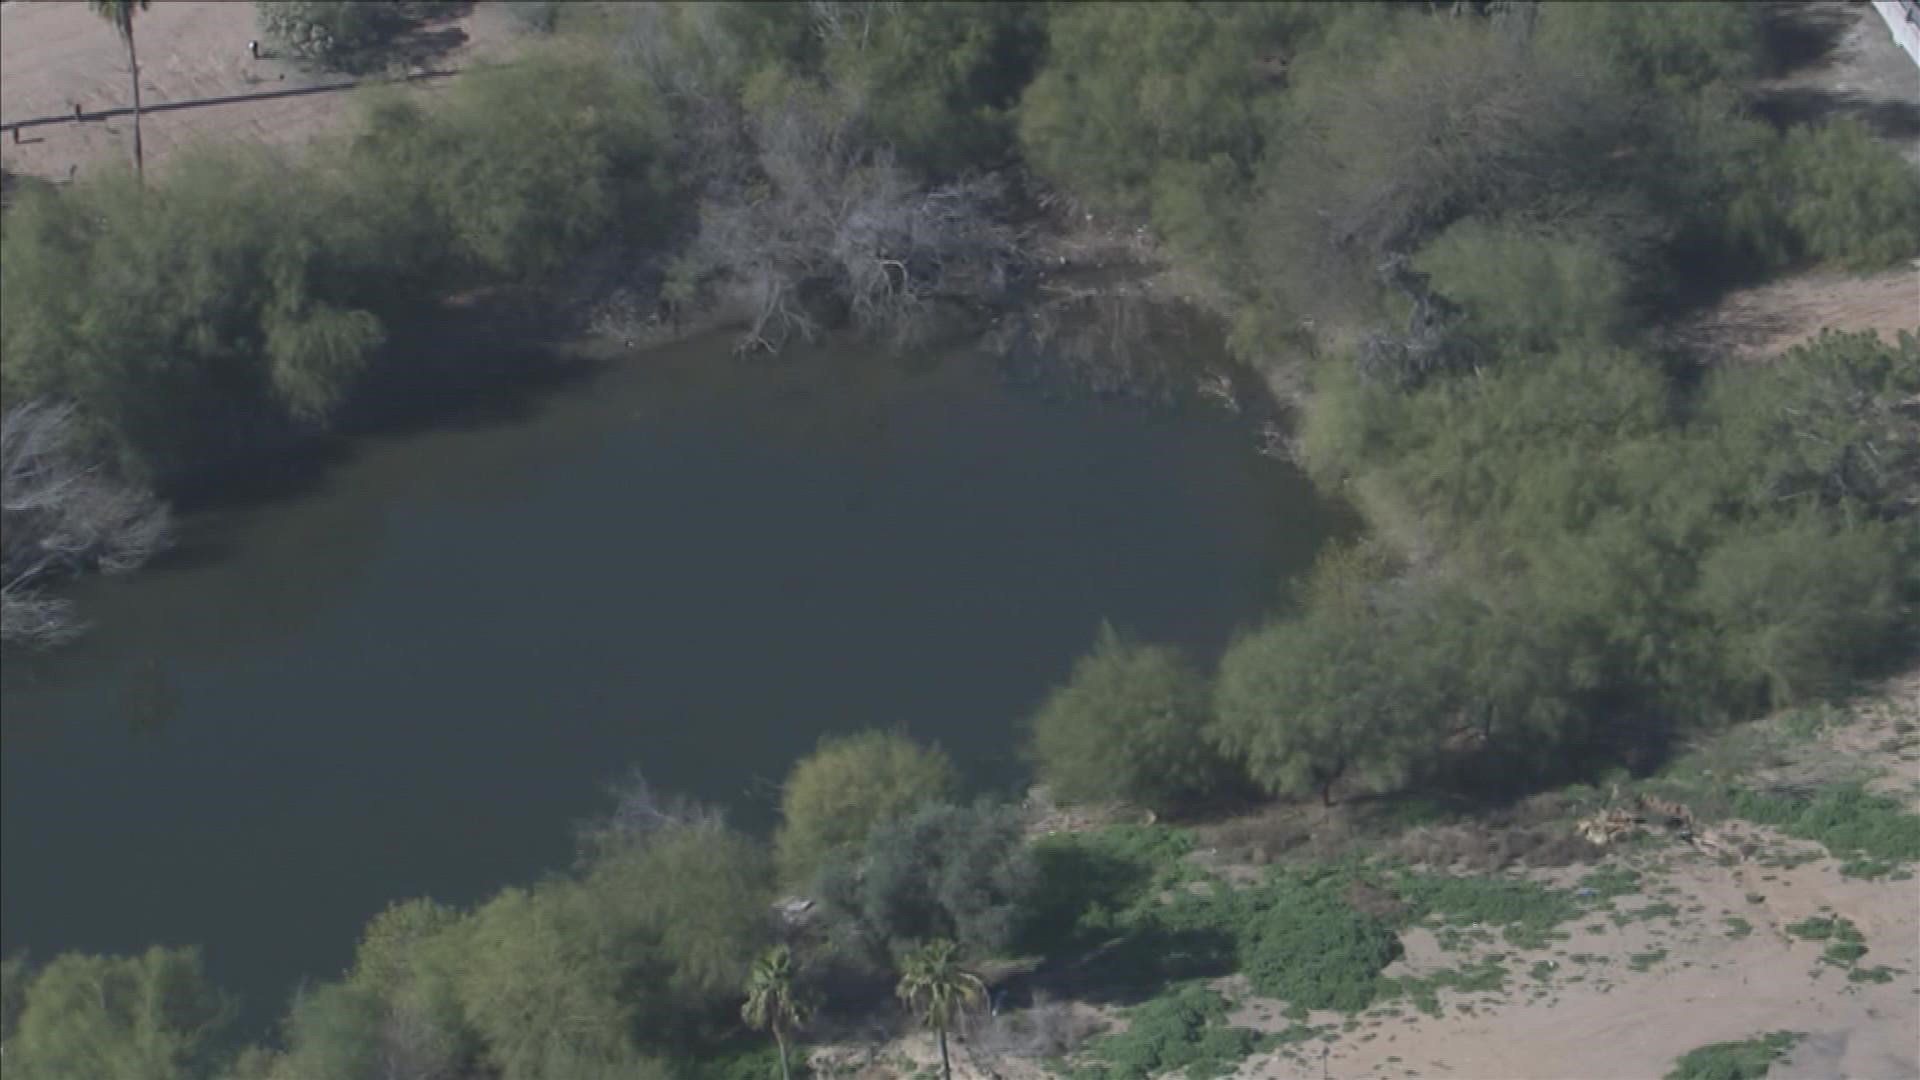 Two teenage girls were found dead in a water retention basin Saturday night, the Mesa Police Department said. The investigation is ongoing.